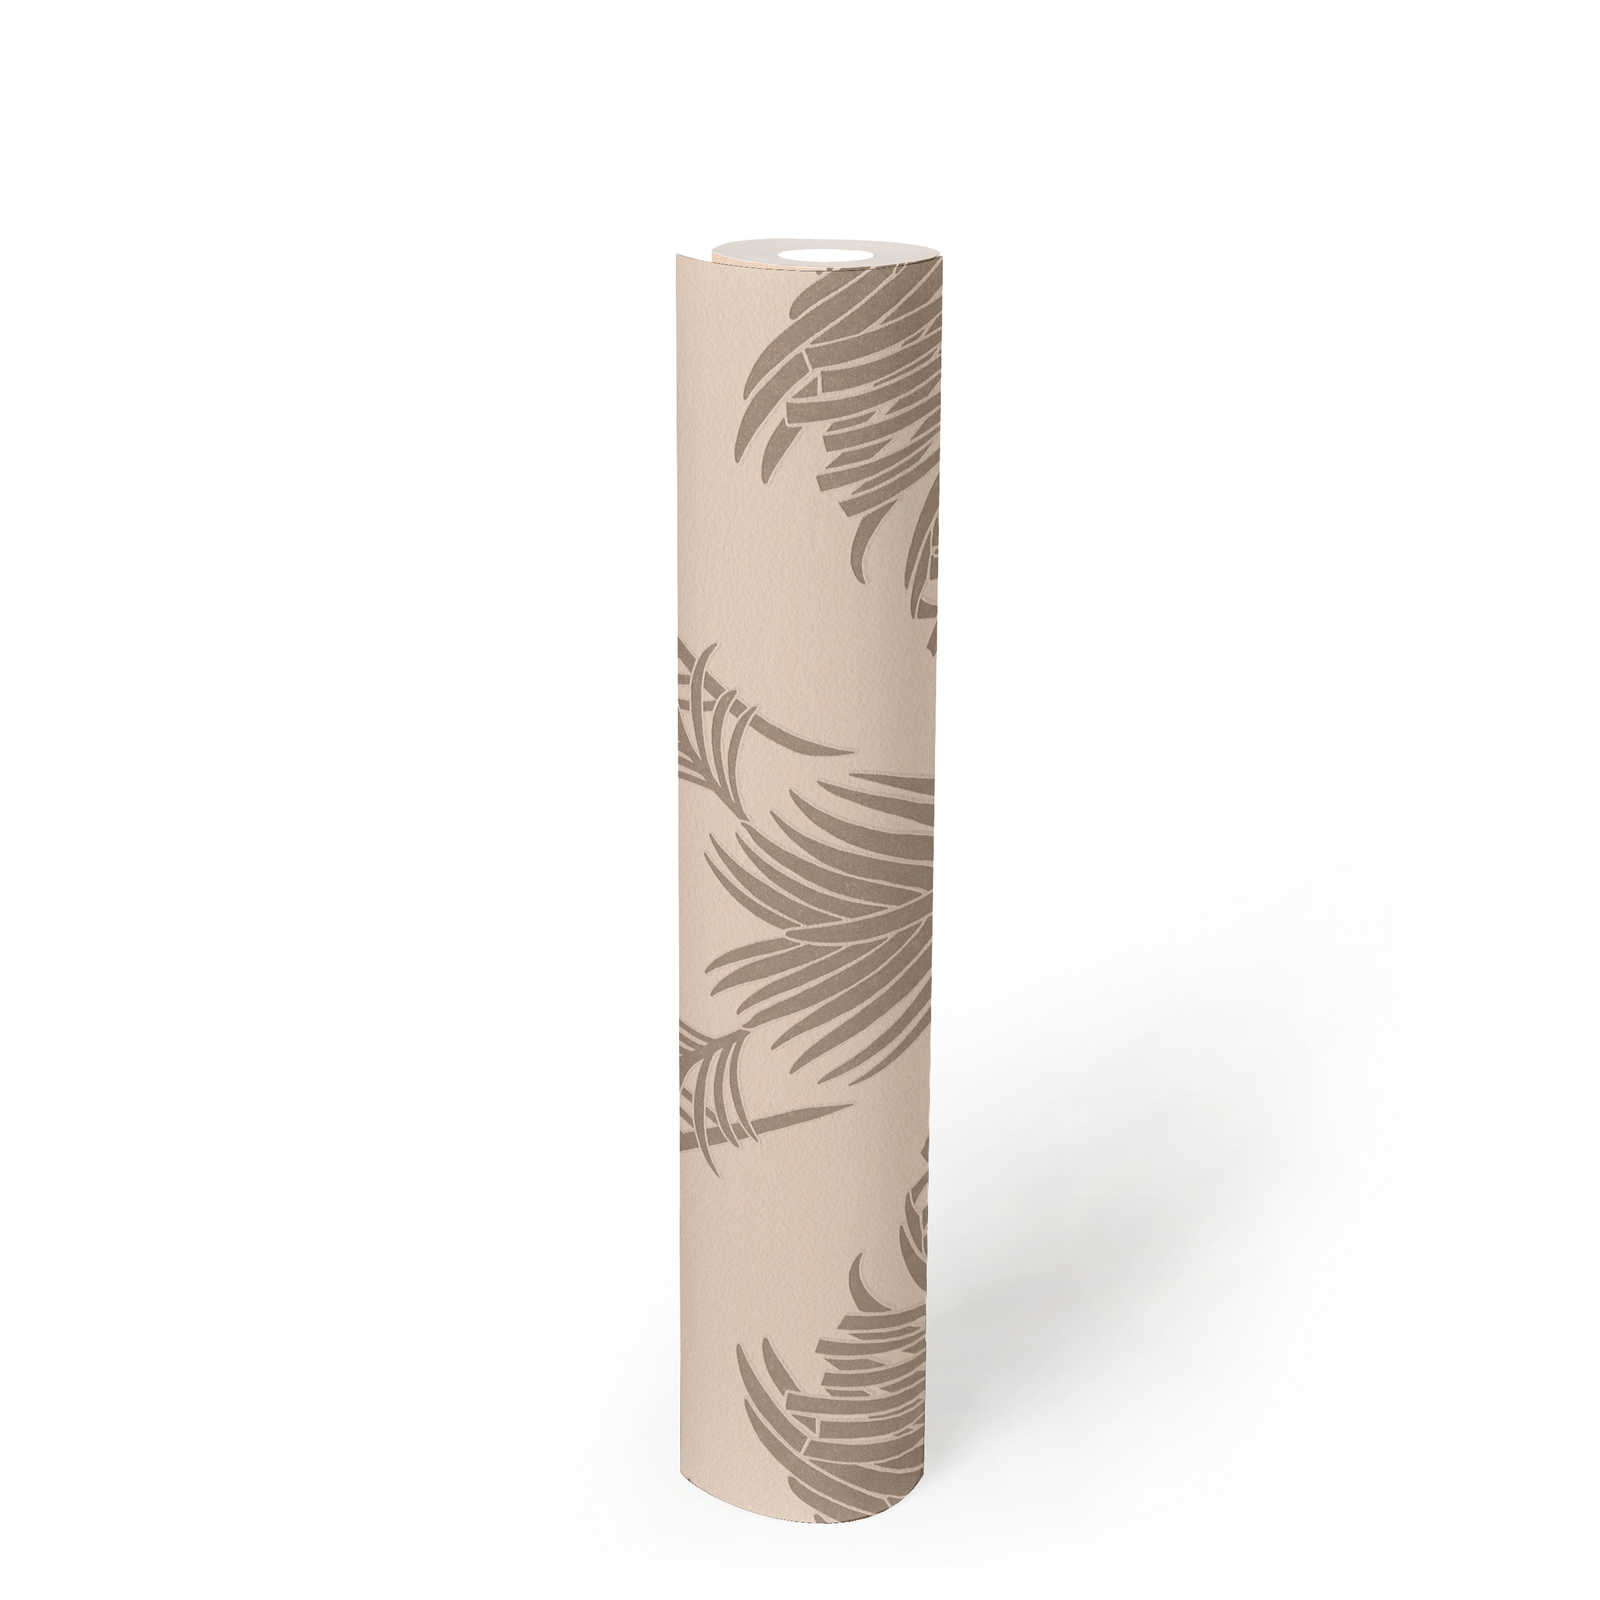             Palm leaves wallpaper pink with metallic & matte effect
        